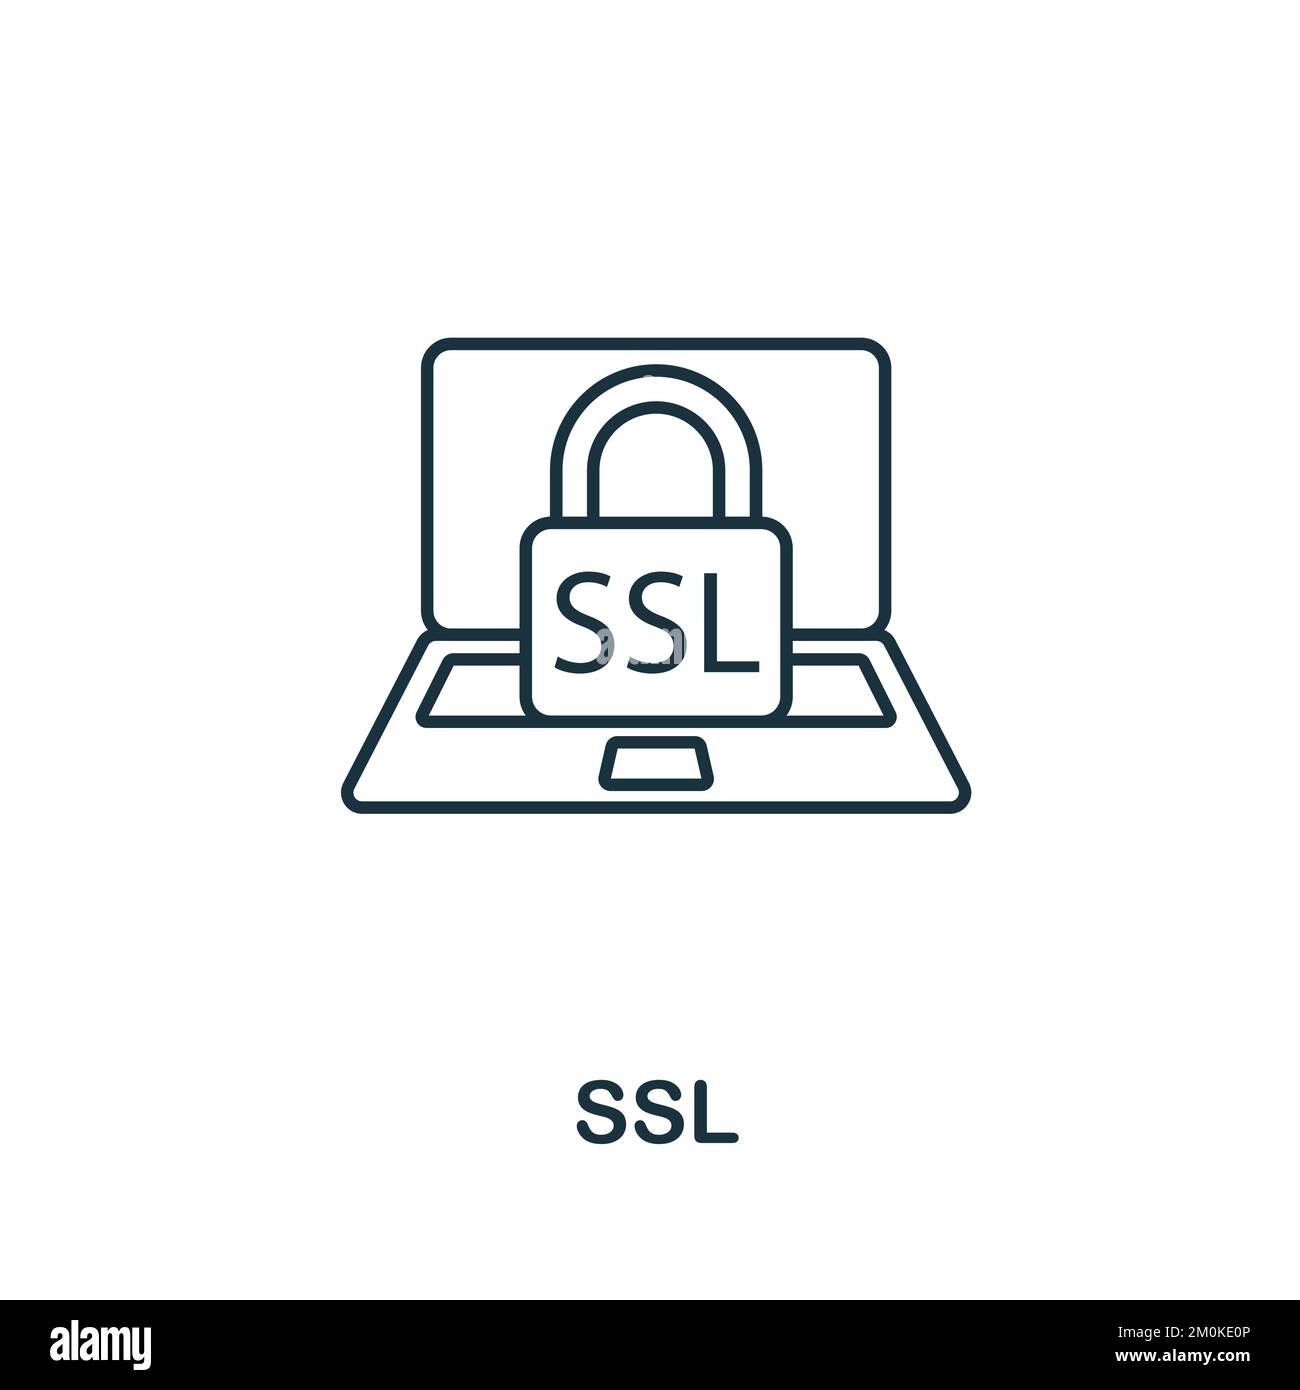 Ssl icon. Monochrome simple Cyber Security icon for templates, web design and infographics Stock Vector